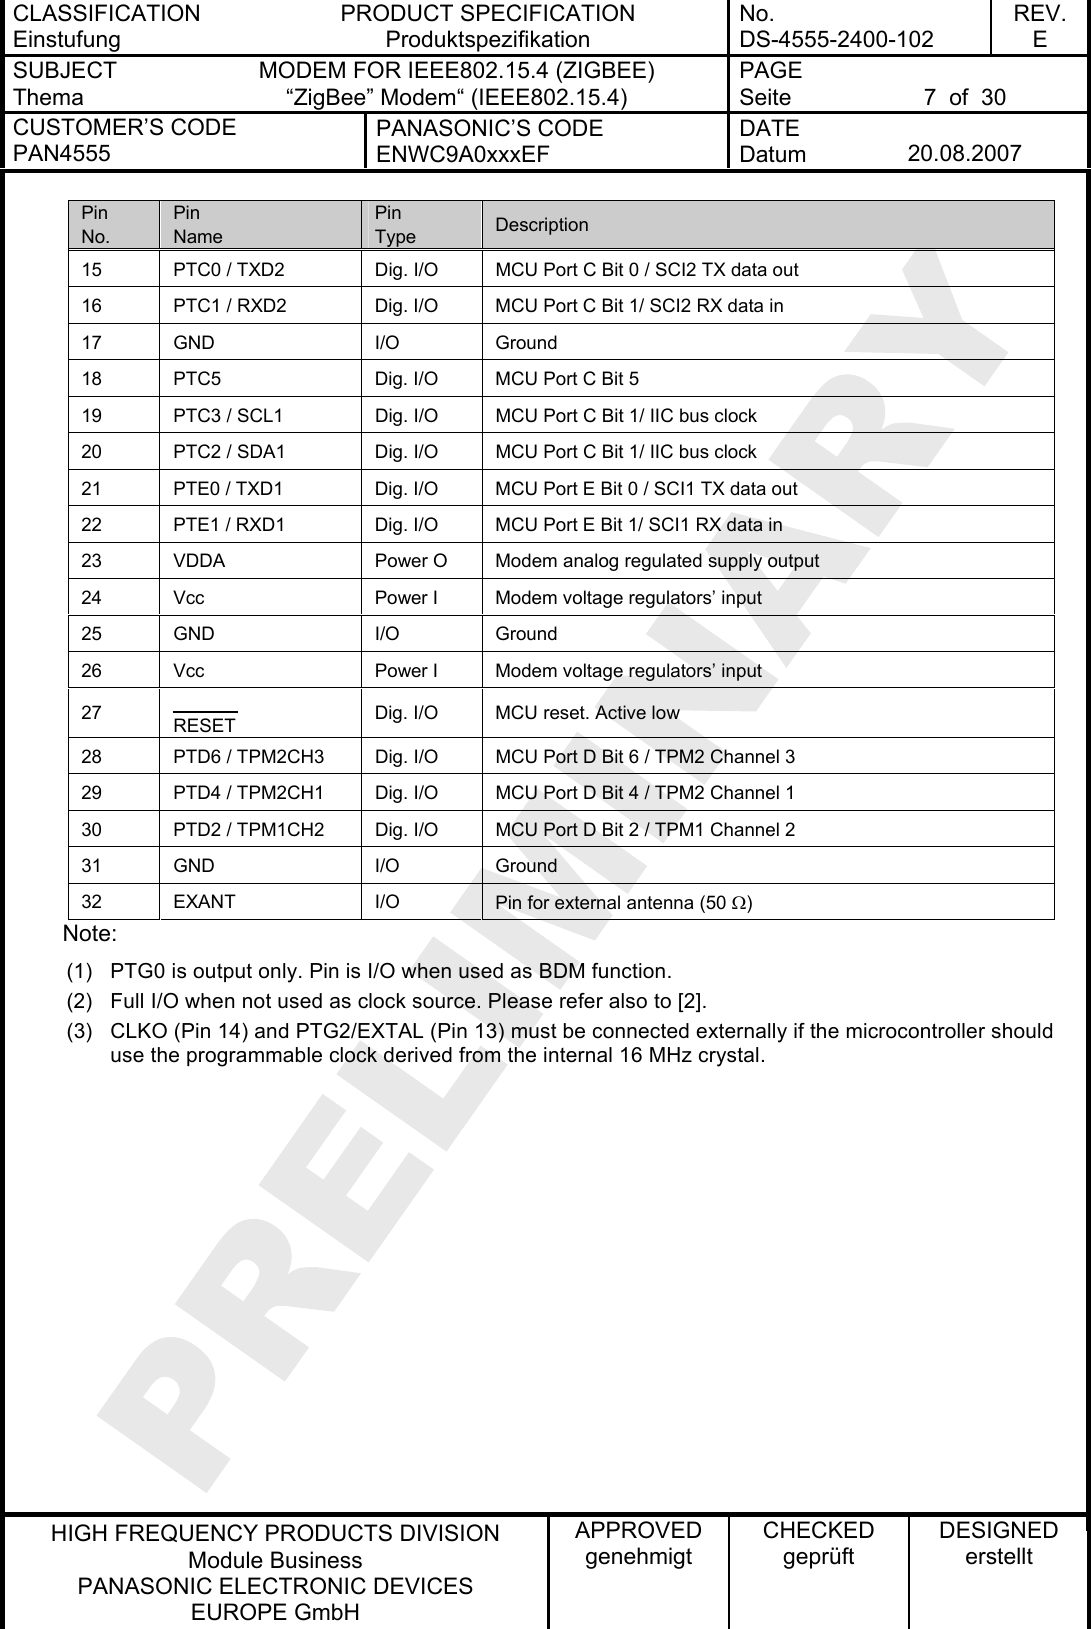 CLASSIFICATION Einstufung PRODUCT SPECIFICATION Produktspezifikation No. DS-4555-2400-102 REV. E SUBJECT Thema MODEM FOR IEEE802.15.4 (ZIGBEE) “ZigBee” Modem“ (IEEE802.15.4) PAGE Seite  7  of  30 CUSTOMER’S CODE PAN4555 PANASONIC’S CODE ENWC9A0xxxEF DATE Datum  20.08.2007   HIGH FREQUENCY PRODUCTS DIVISION Module Business PANASONIC ELECTRONIC DEVICES  EUROPE GmbH APPROVED genehmigt CHECKED geprüft DESIGNED erstellt Pin No. Pin Name Pin Type  Description 15  PTC0 / TXD2  Dig. I/O  MCU Port C Bit 0 / SCI2 TX data out 16  PTC1 / RXD2  Dig. I/O  MCU Port C Bit 1/ SCI2 RX data in 17 GND  I/O  Ground 18  PTC5  Dig. I/O  MCU Port C Bit 5 19  PTC3 / SCL1  Dig. I/O  MCU Port C Bit 1/ IIC bus clock 20  PTC2 / SDA1  Dig. I/O  MCU Port C Bit 1/ IIC bus clock 21  PTE0 / TXD1  Dig. I/O  MCU Port E Bit 0 / SCI1 TX data out 22  PTE1 / RXD1  Dig. I/O  MCU Port E Bit 1/ SCI1 RX data in 23  VDDA  Power O  Modem analog regulated supply output 24  Vcc  Power I  Modem voltage regulators’ input 25 GND  I/O  Ground 26  Vcc  Power I  Modem voltage regulators’ input  27  RESET  Dig. I/O  MCU reset. Active low 28  PTD6 / TPM2CH3  Dig. I/O  MCU Port D Bit 6 / TPM2 Channel 3 29  PTD4 / TPM2CH1  Dig. I/O  MCU Port D Bit 4 / TPM2 Channel 1 30  PTD2 / TPM1CH2  Dig. I/O  MCU Port D Bit 2 / TPM1 Channel 2 31 GND  I/O  Ground 32 EXANT  I/O  Pin for external antenna (50 Ω) Note: (1)  PTG0 is output only. Pin is I/O when used as BDM function. (2)  Full I/O when not used as clock source. Please refer also to [2]. (3)  CLKO (Pin 14) and PTG2/EXTAL (Pin 13) must be connected externally if the microcontroller should use the programmable clock derived from the internal 16 MHz crystal.  